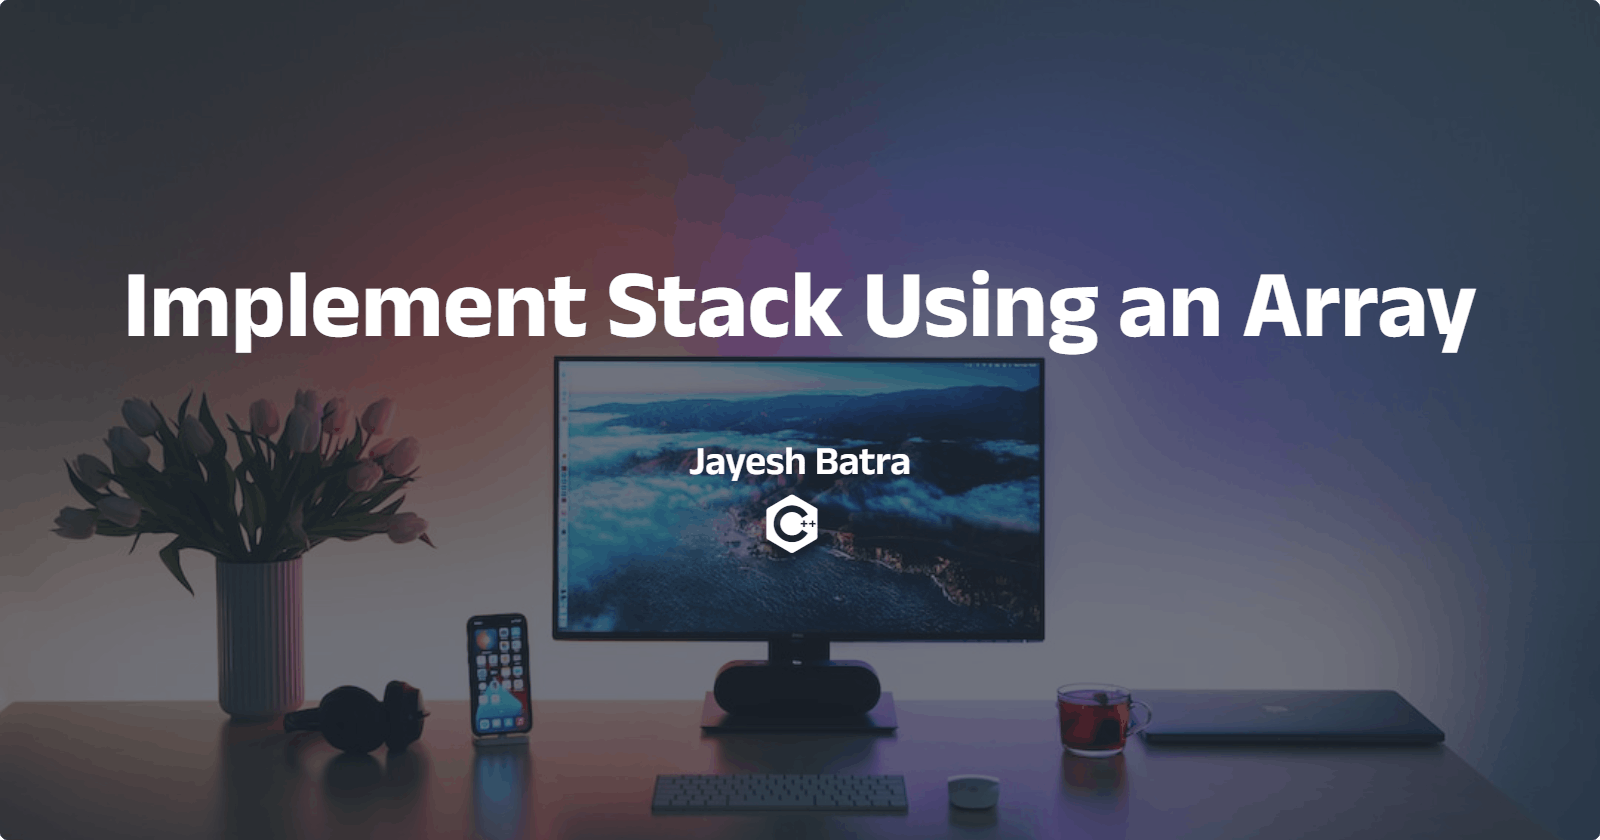 Implement A Stack Using an Array